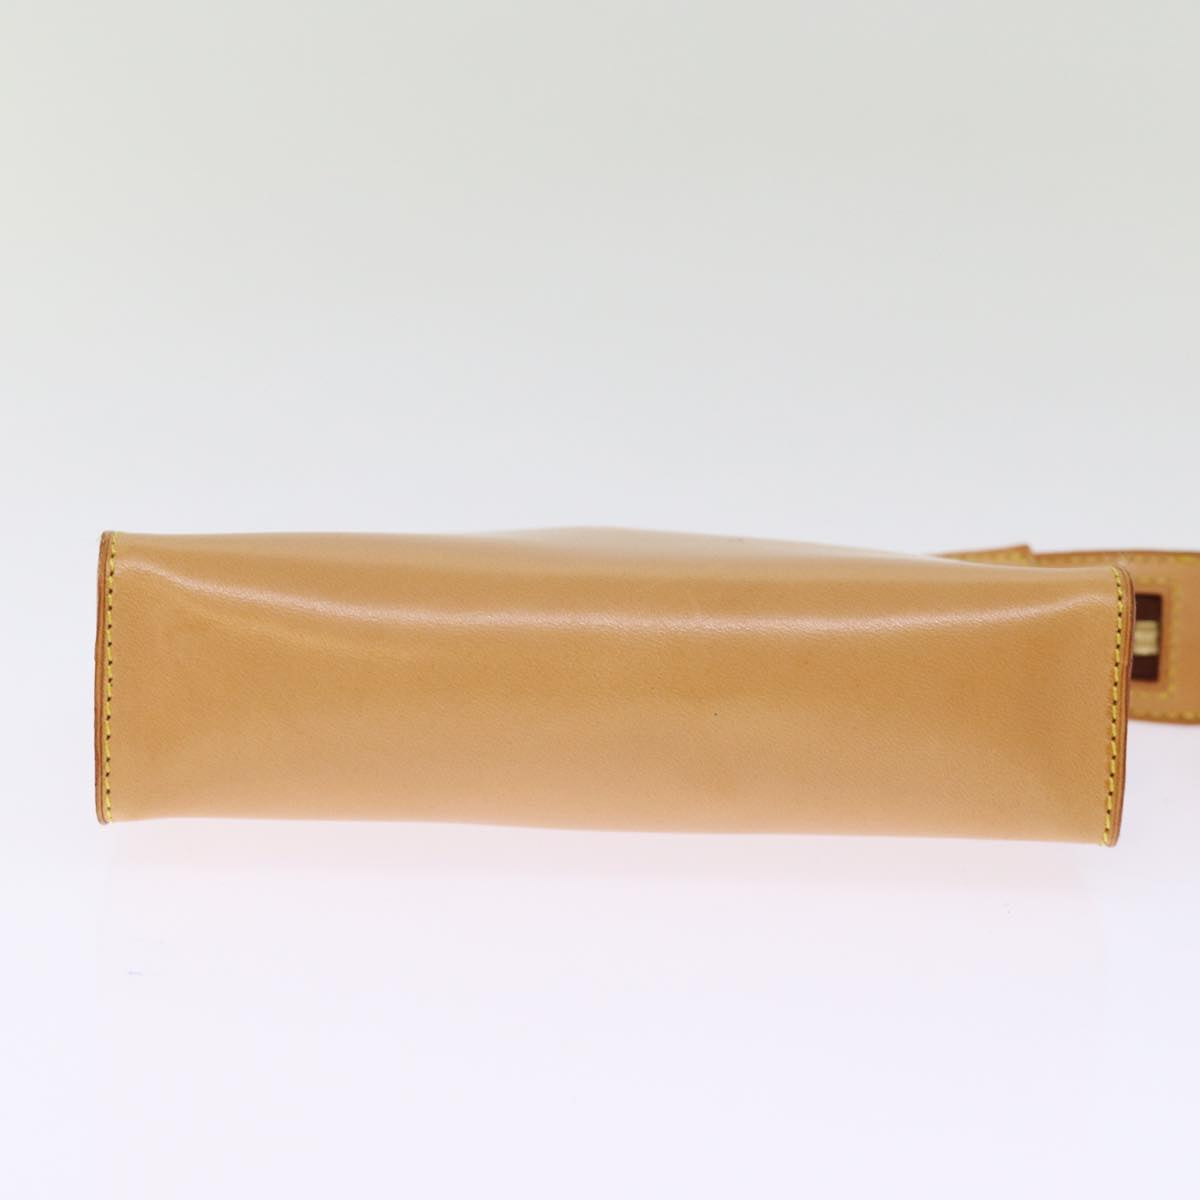 LOUIS VUITTON Nomad Accessory Pouch Leather Beige LV Auth bs14530